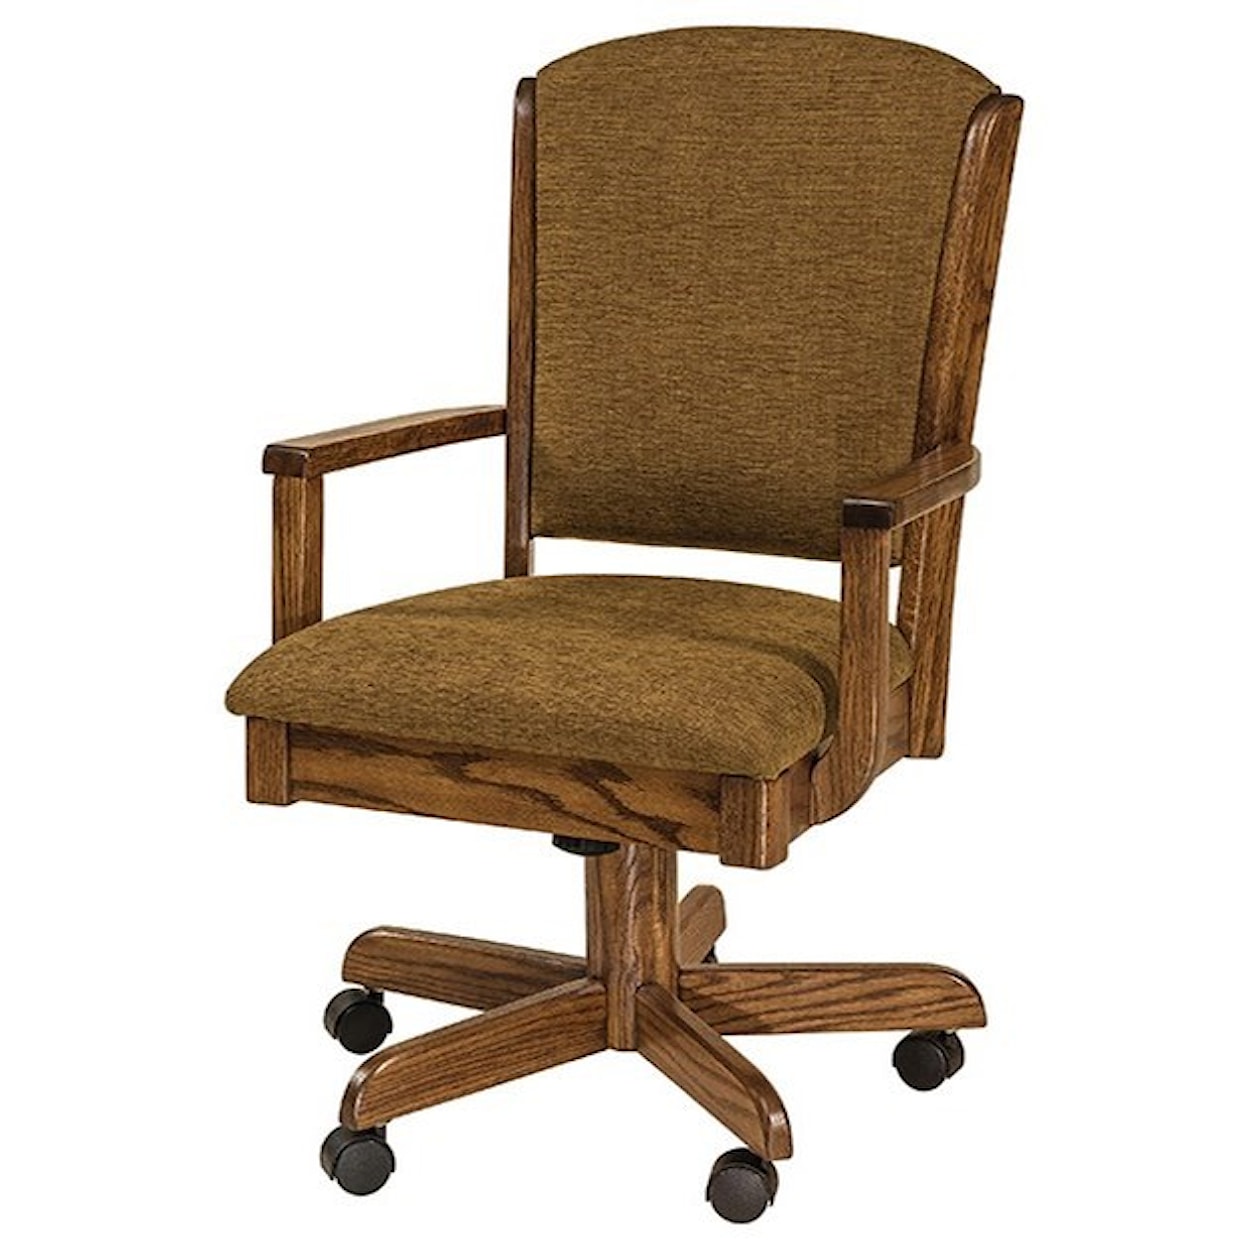 F&N Woodworking Morris Customizable Solid Wood Desk Chair